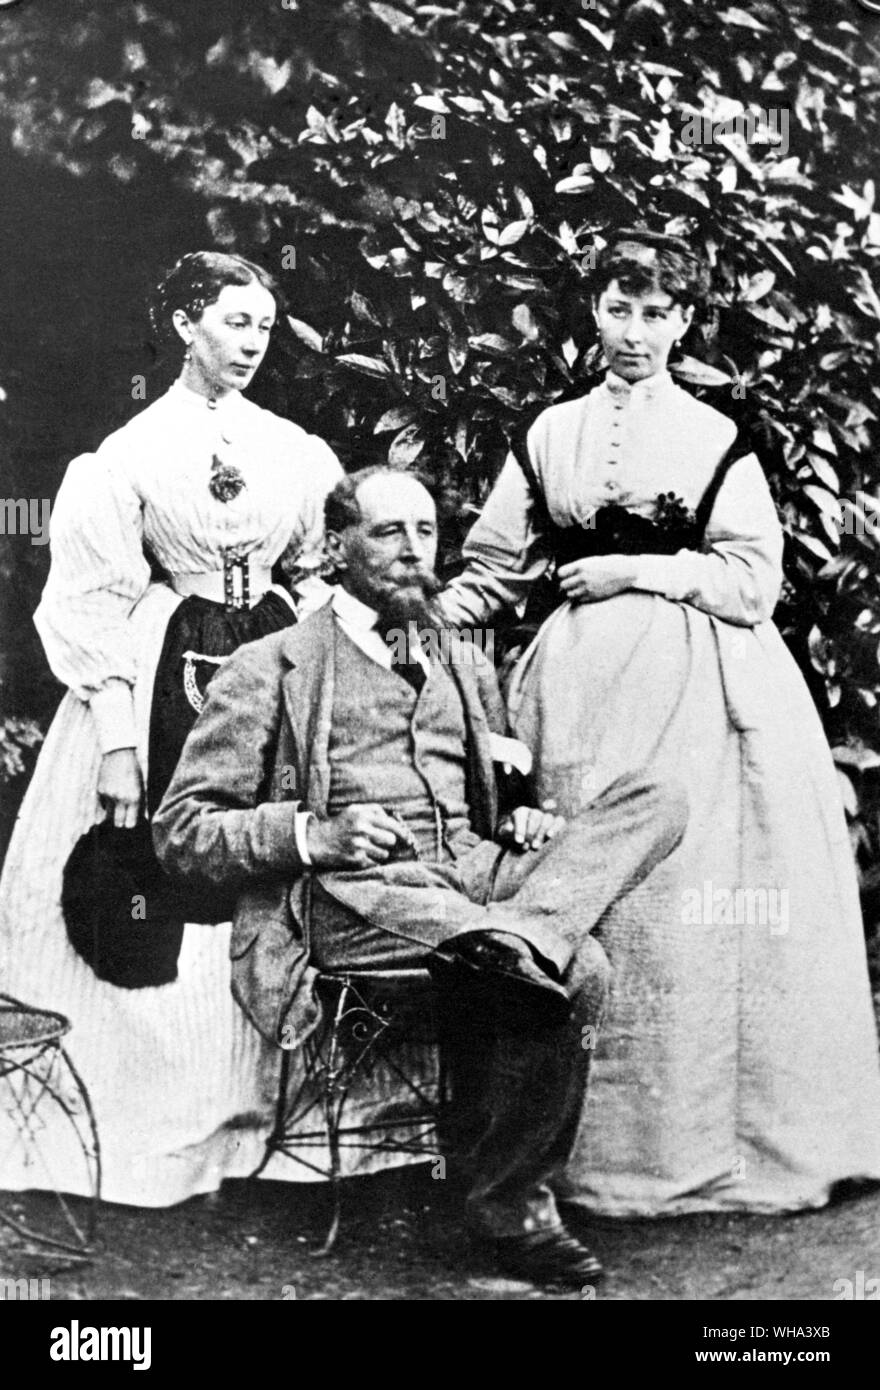 Charles Dickens with his two daughters, Kate and Mamey. . Dickens, Charles John Huffam (pseudonym Boz) English novelist. wrote novels Pickwick Papers 1836-1837, Oliver Twist 1837-1839, A Christmas Carol 1843, Bleak House 1852-1853, A Tale of Two Cities 1859  1812-1870 . . Stock Photo